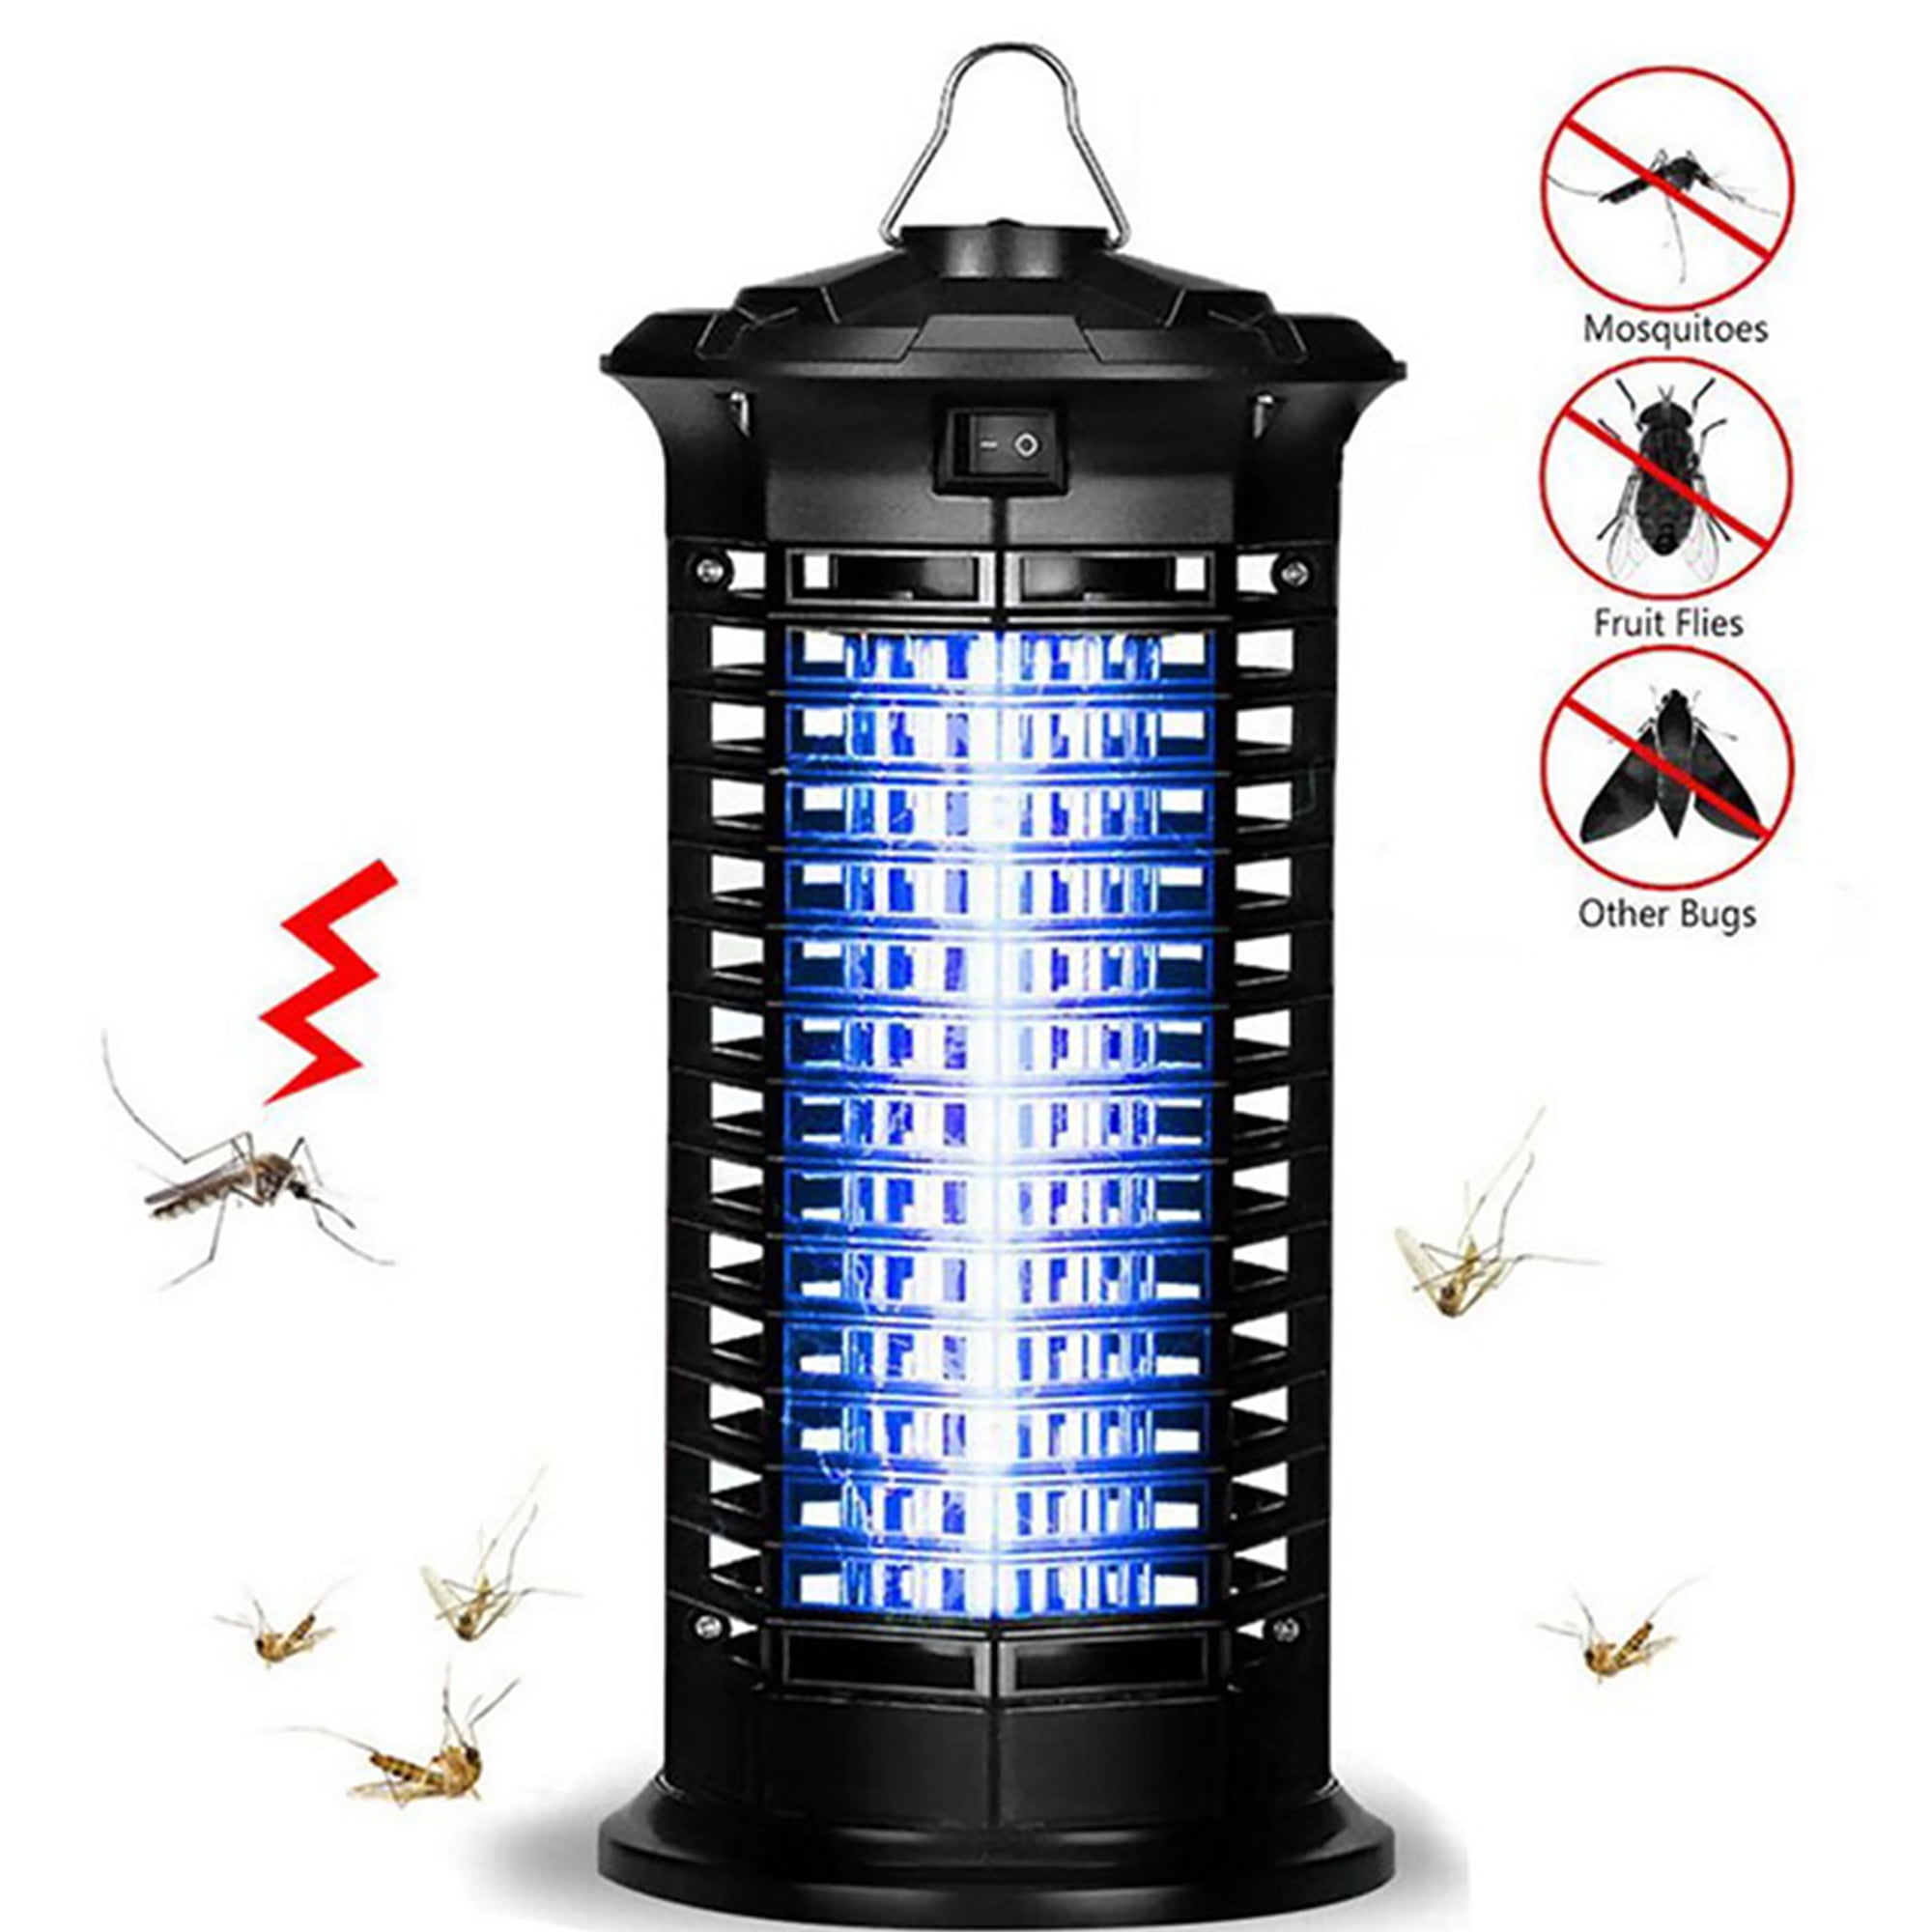 Mosquito Killer Insect Trap Pest Control Light with Switch Button Electronic UV Lamp for Indoor Outdoor Bedroom Office fomei Bug Zapper Home Updated Kitchen 